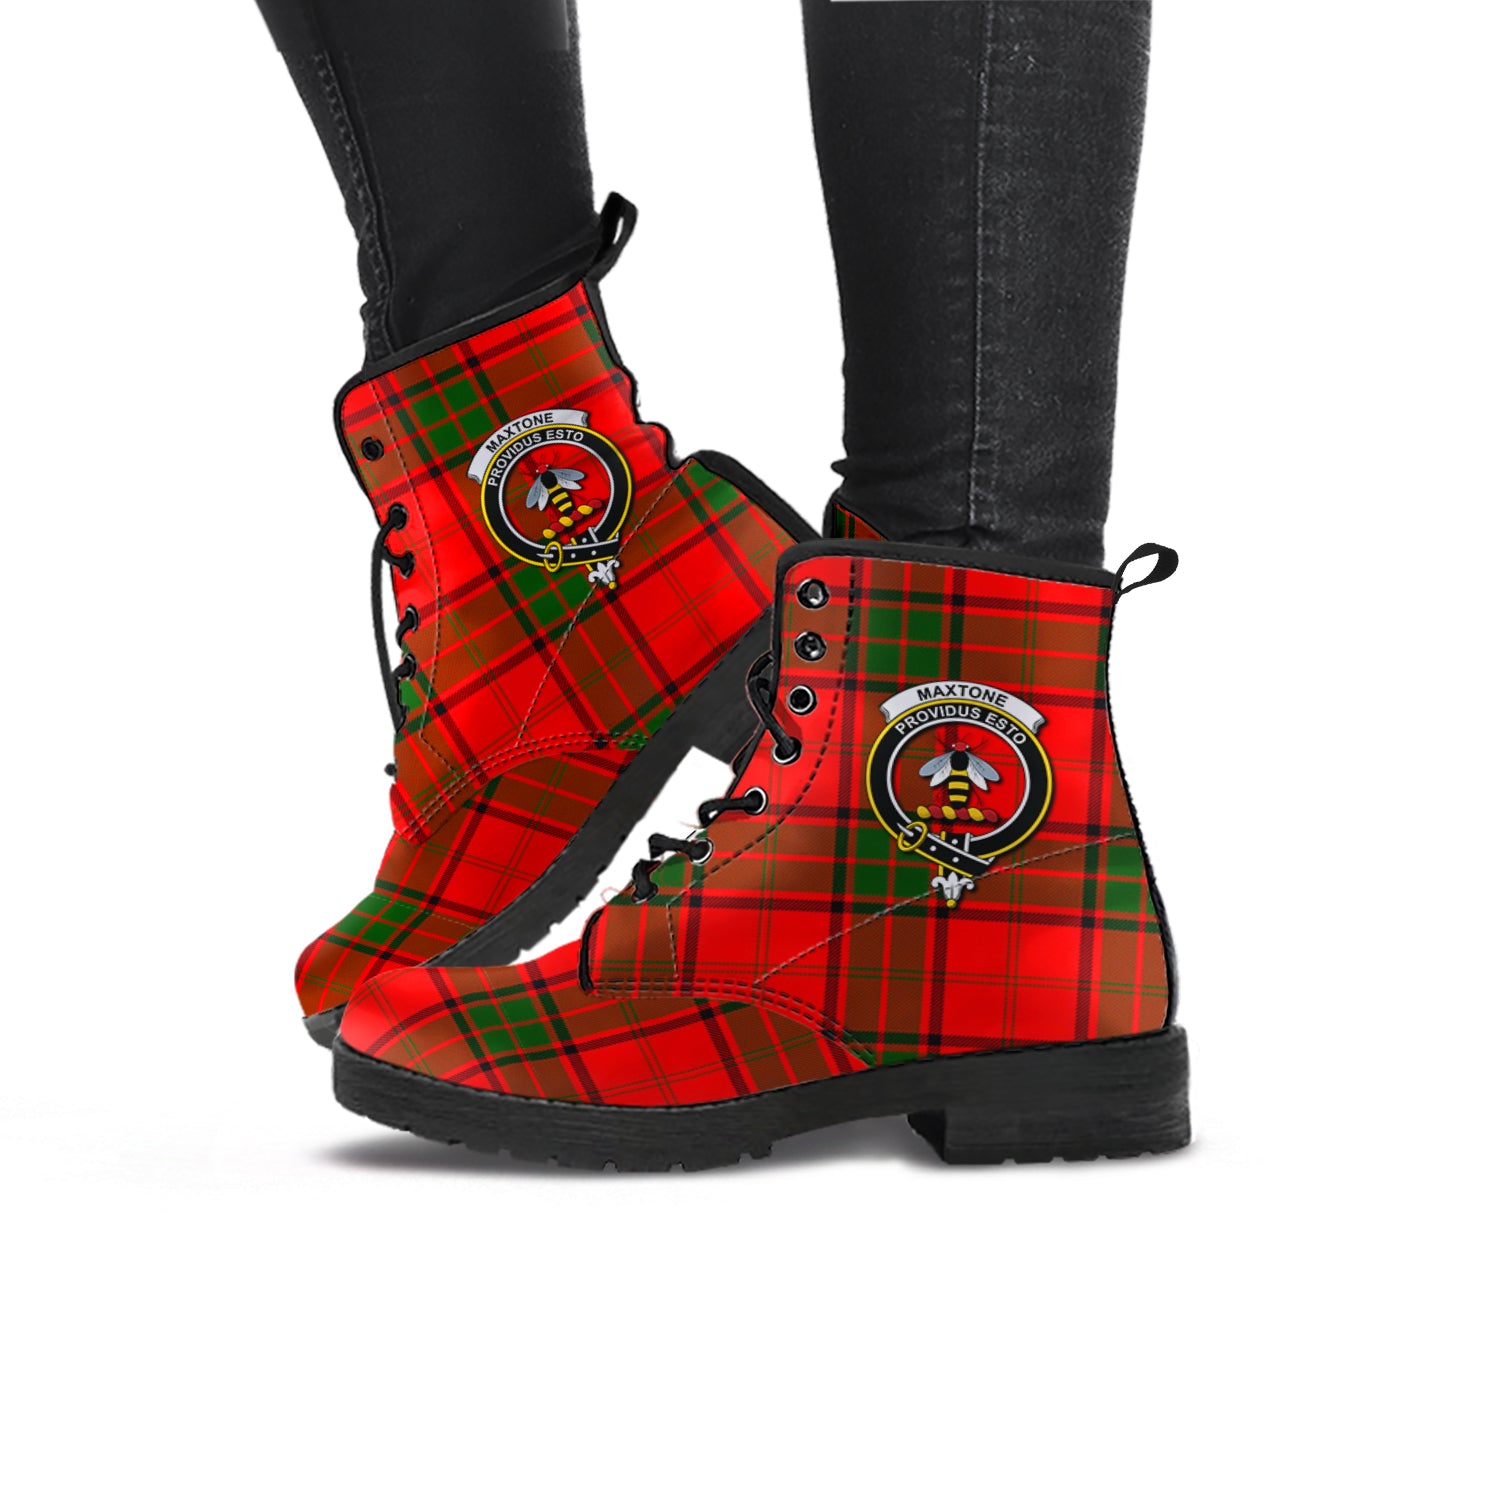 maxtone-tartan-leather-boots-with-family-crest